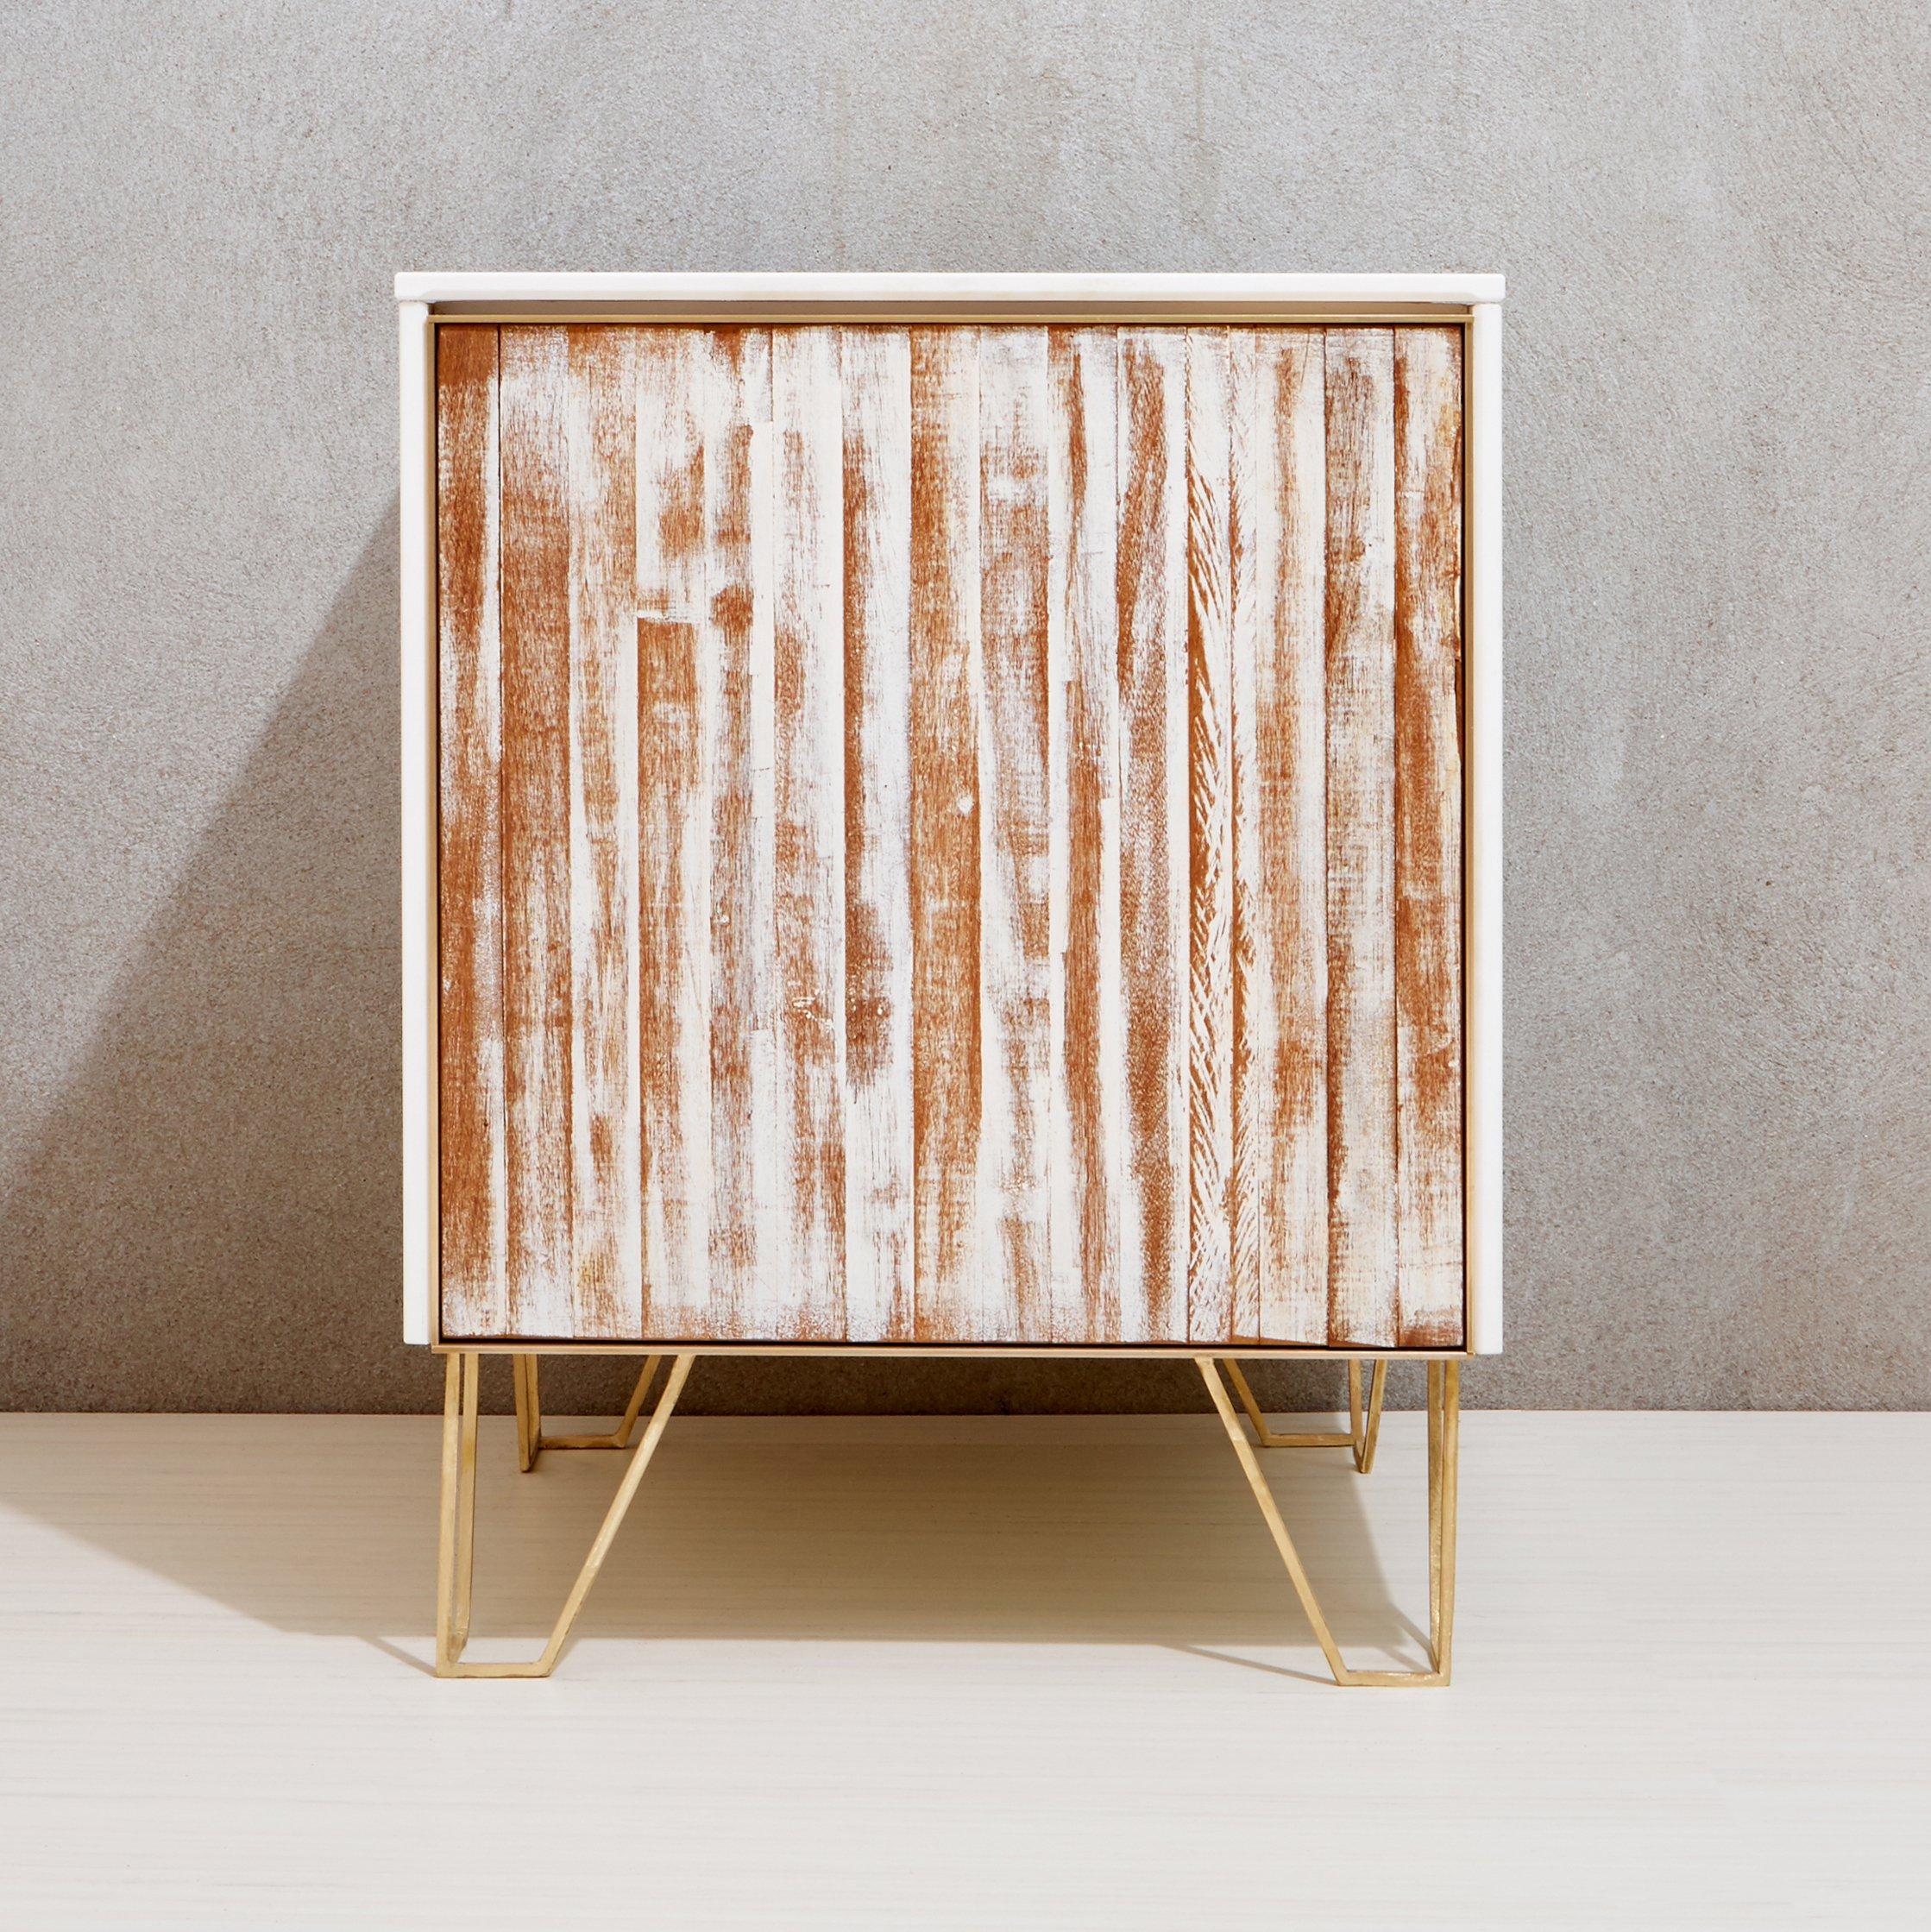 Clean lines of modern materials seamlessly mesh with distressed hardwood in this one of a kind furniture piece. Floating effortlessly atop our handcrafted brass legs the soft matte finish of the exterior panels frame a rich history within the